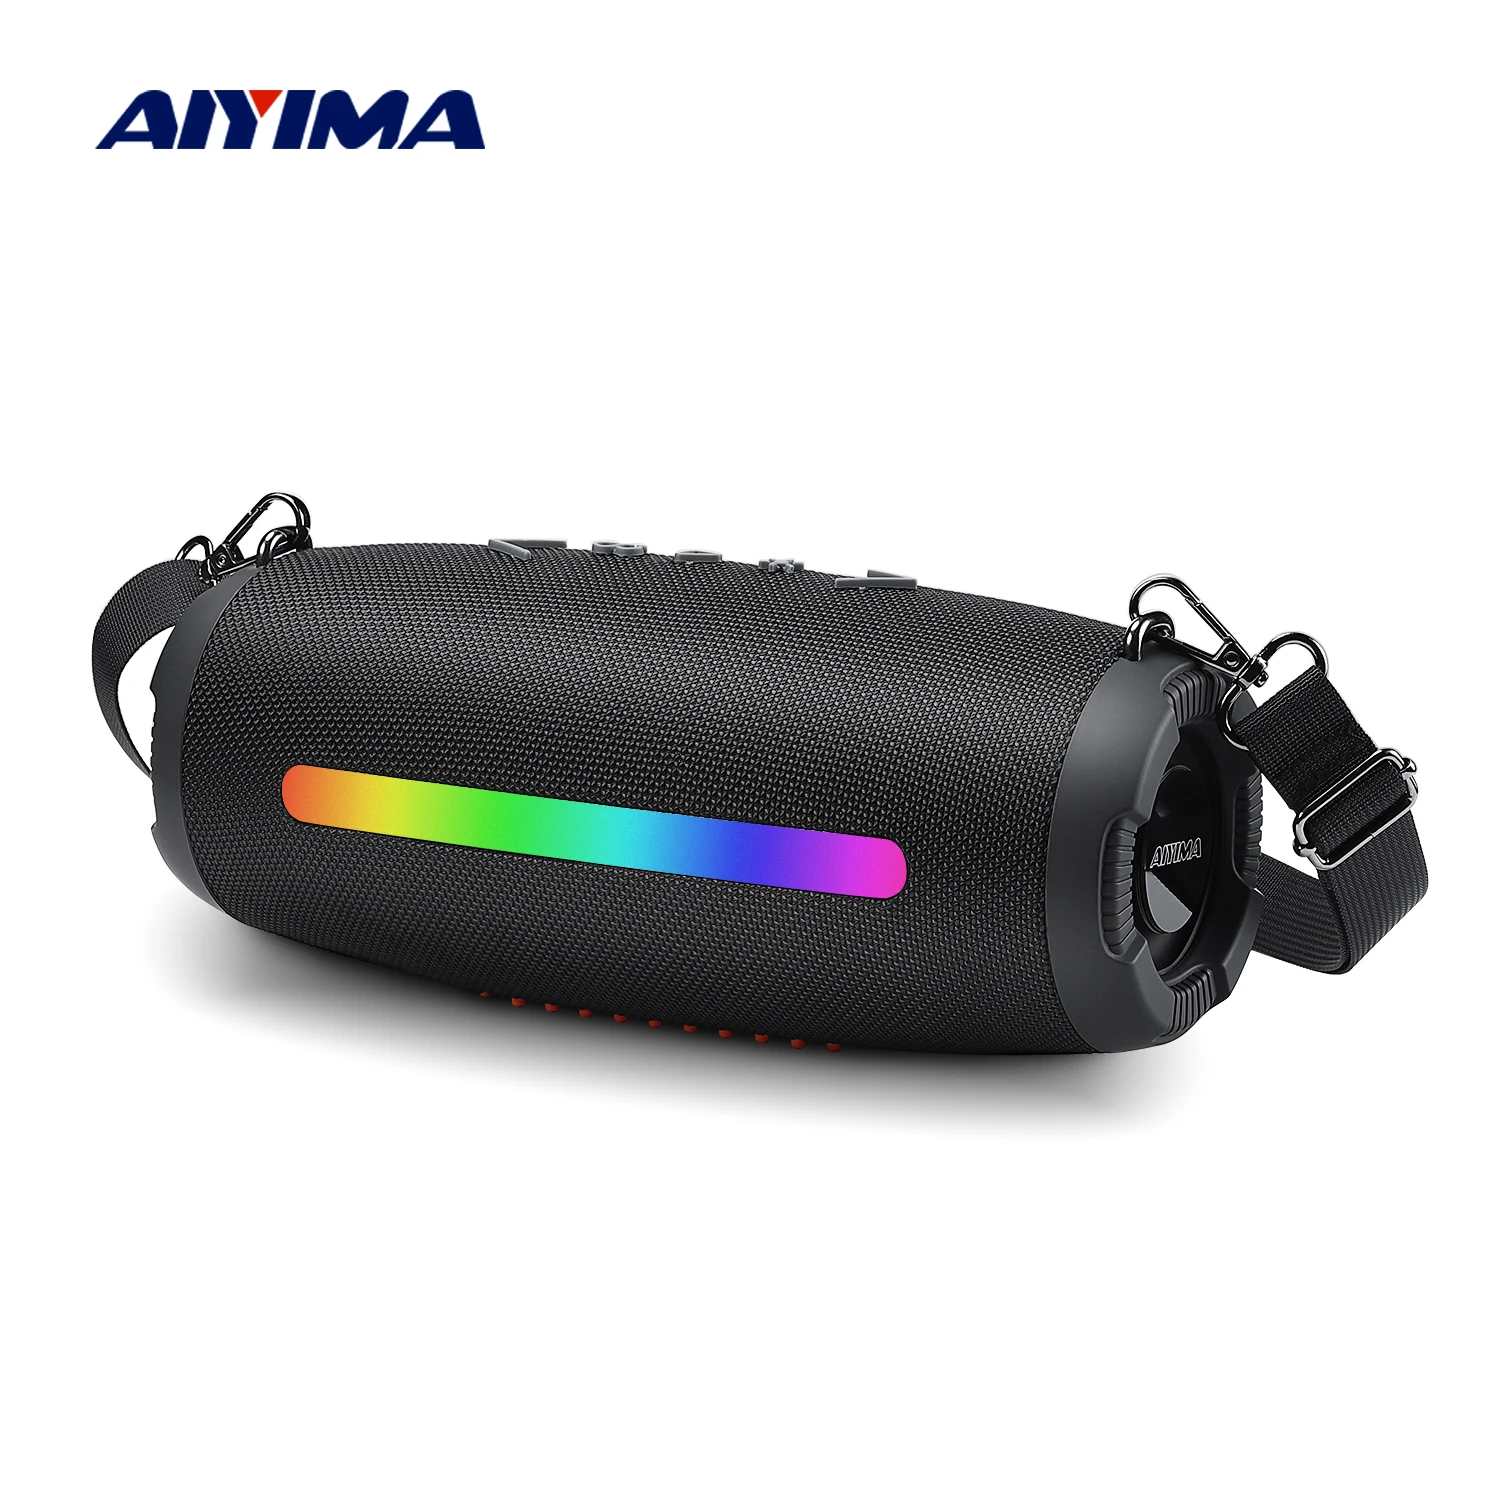 

AIYIMA S200 40W Bluetooth Portable Speaker Powerful Sound Deep Bass Waterproof Wireless Speakers For Outdoor Camping TF/USB/AUX